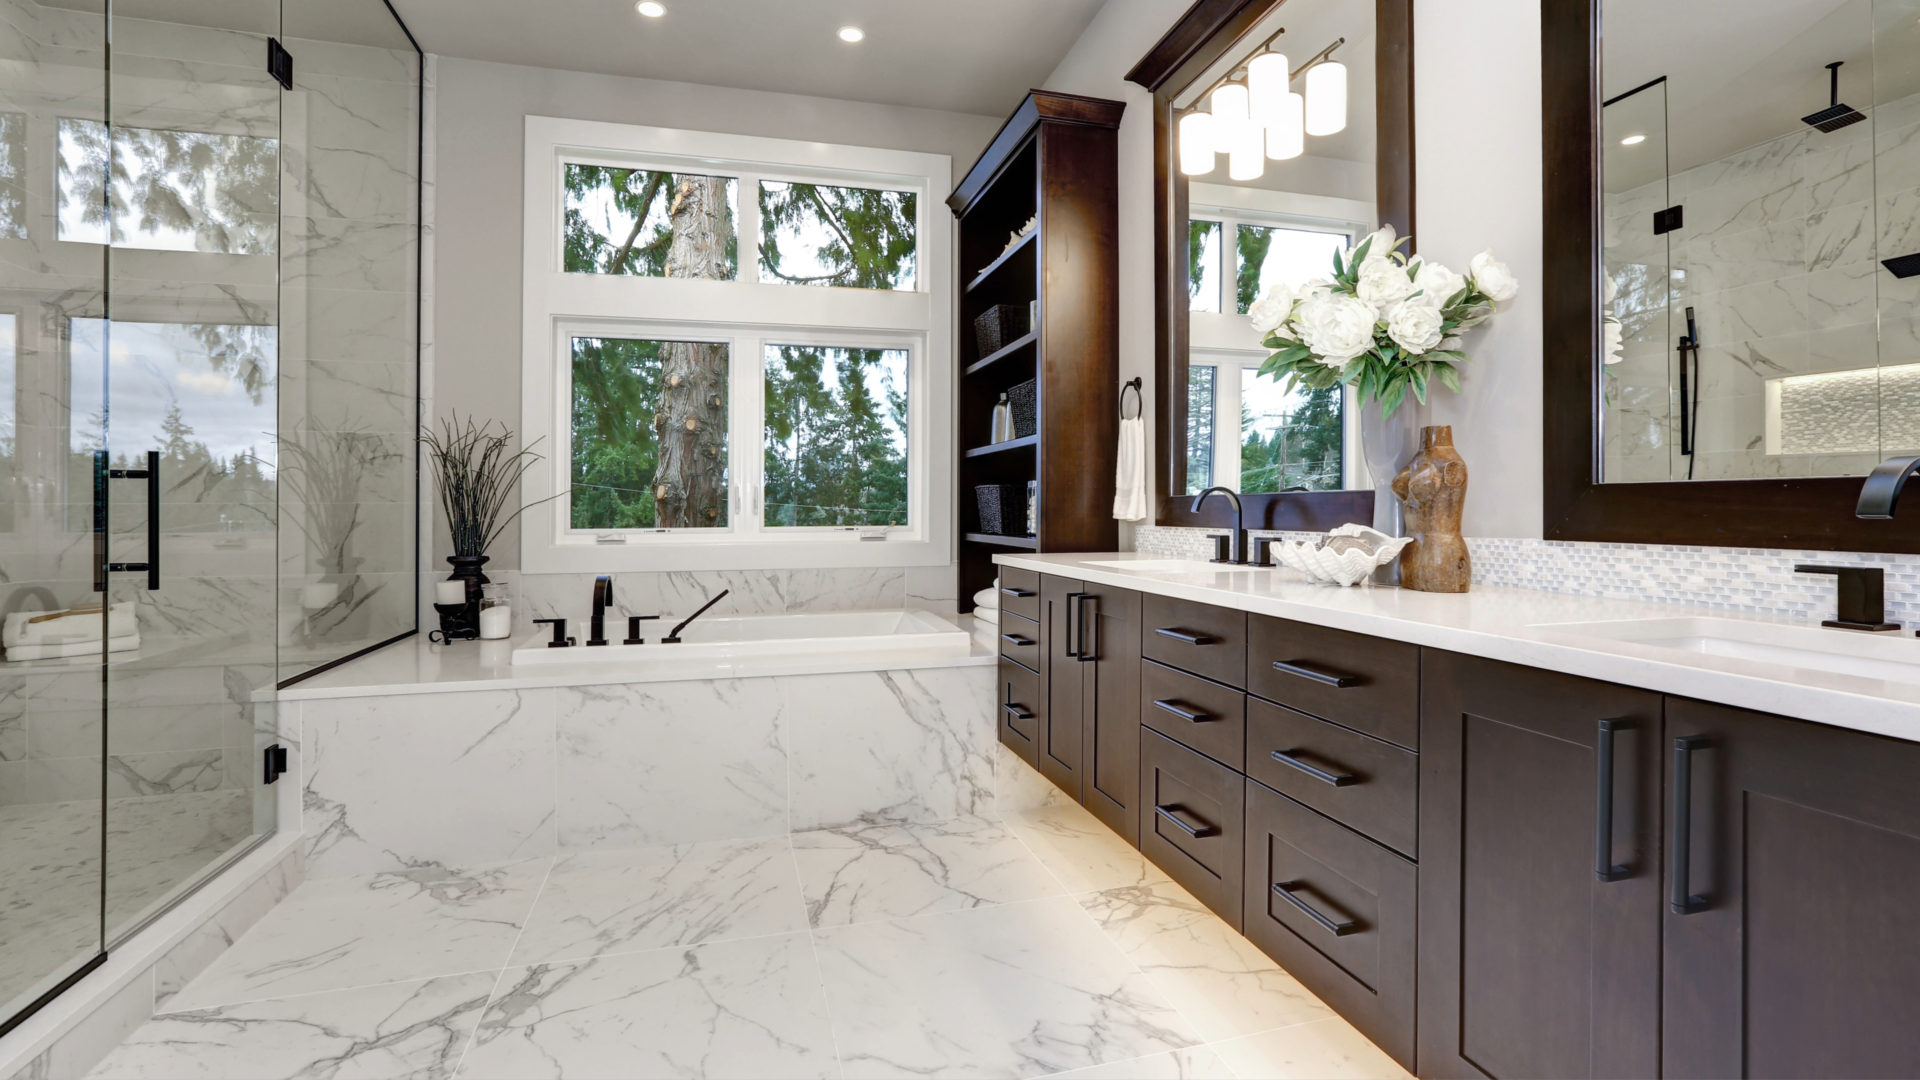 A large bathroom with a tub under a window and a large wooden vanity. The bathroom has white and gray floors 